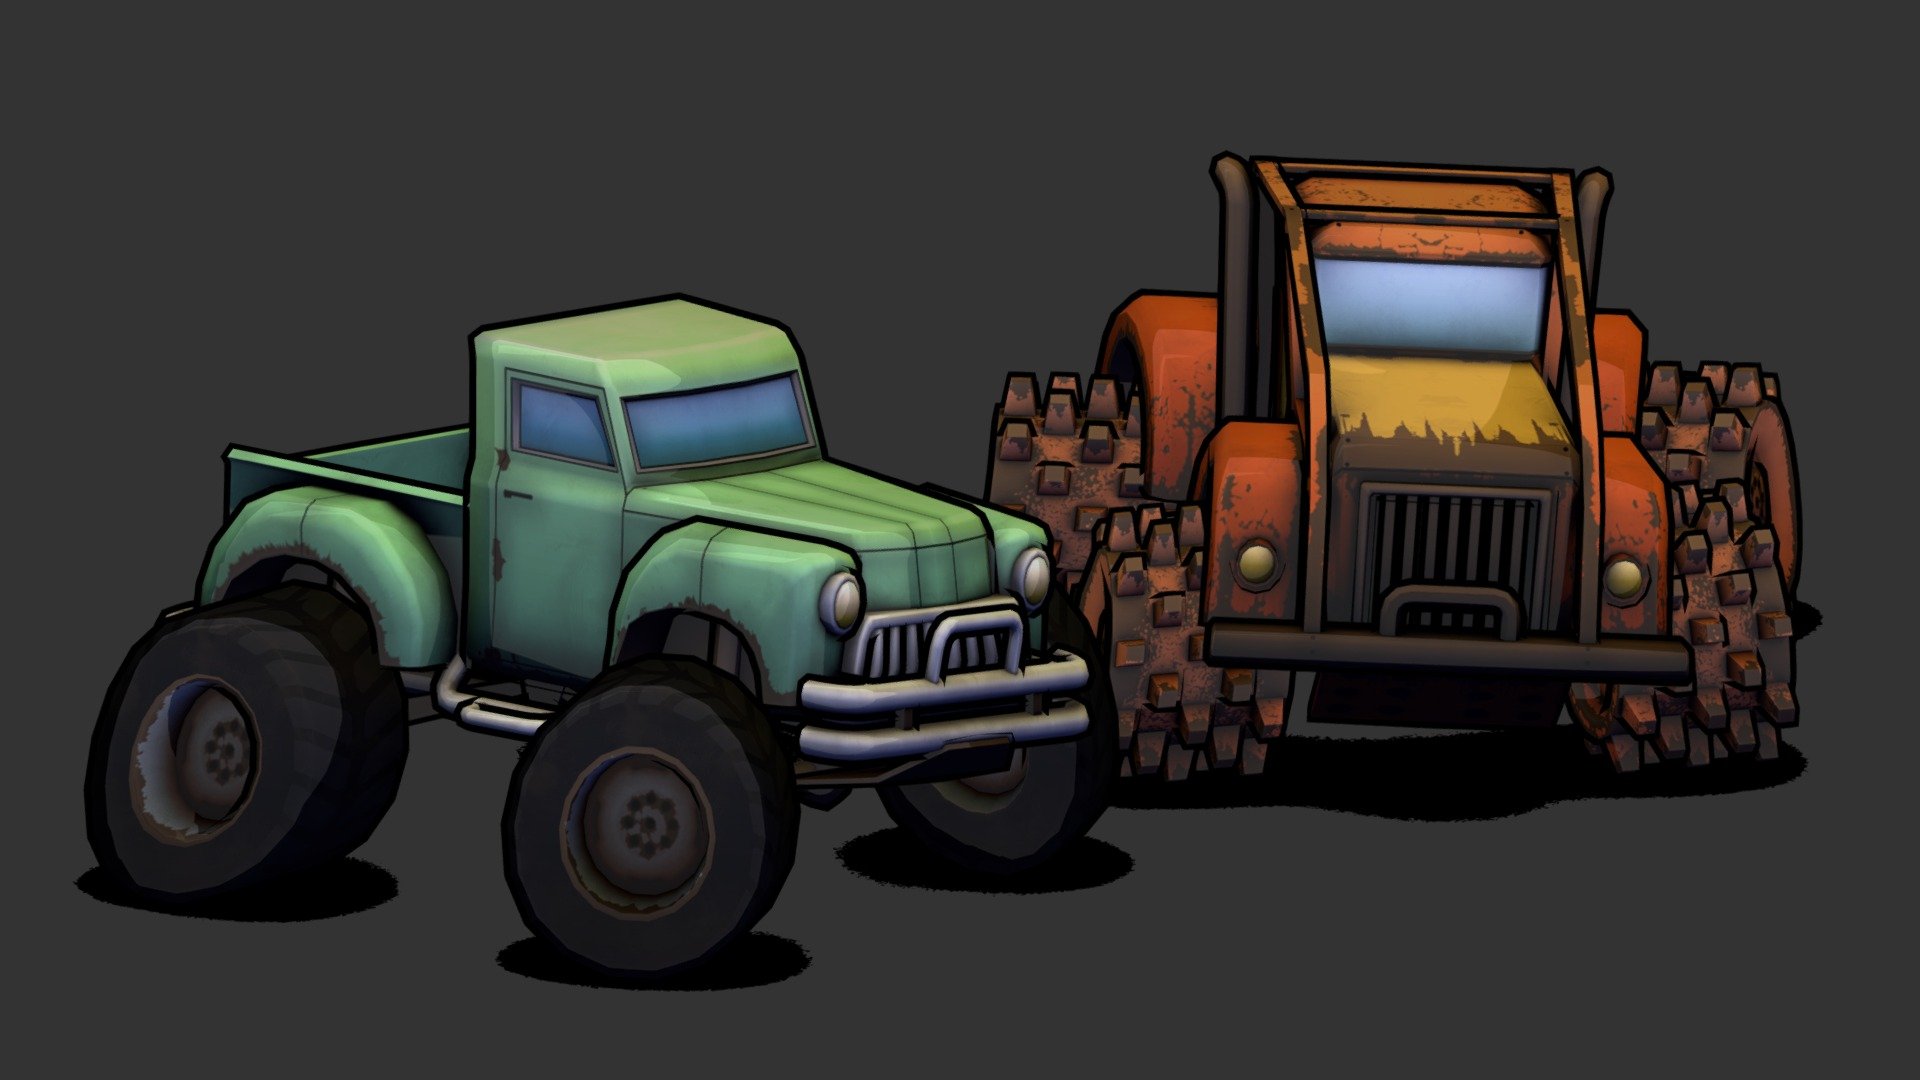 Commission for a game, these were quite different to work on, but also really fun to do! - Stylized Monster Trucks - 3D model by Renafox (@kryik1023) 3d model